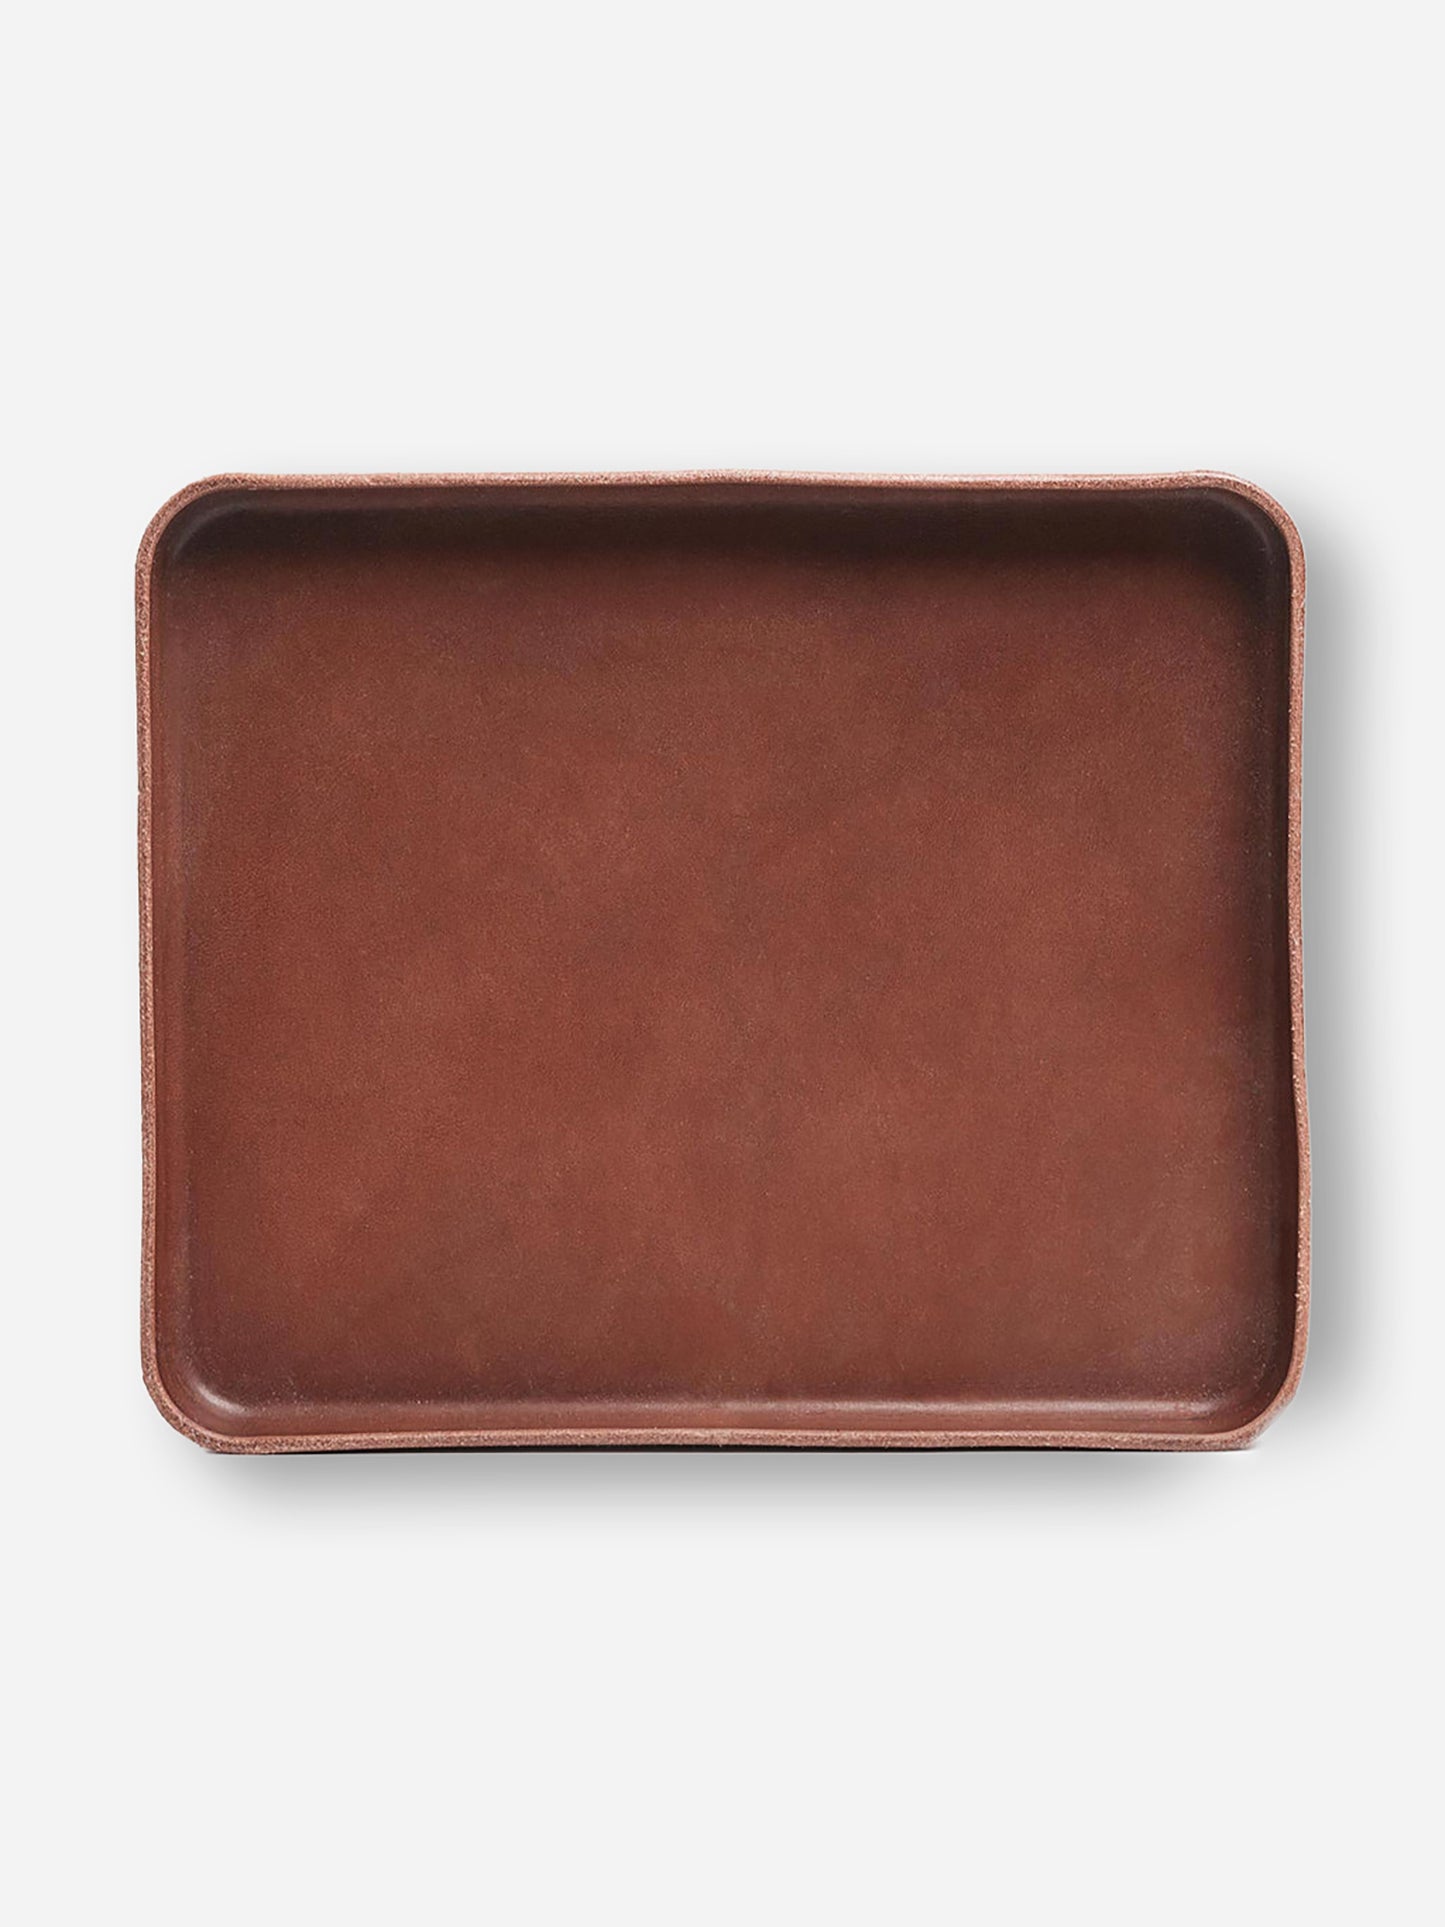 Billykirk No. 471 Large Leather Valet Tray